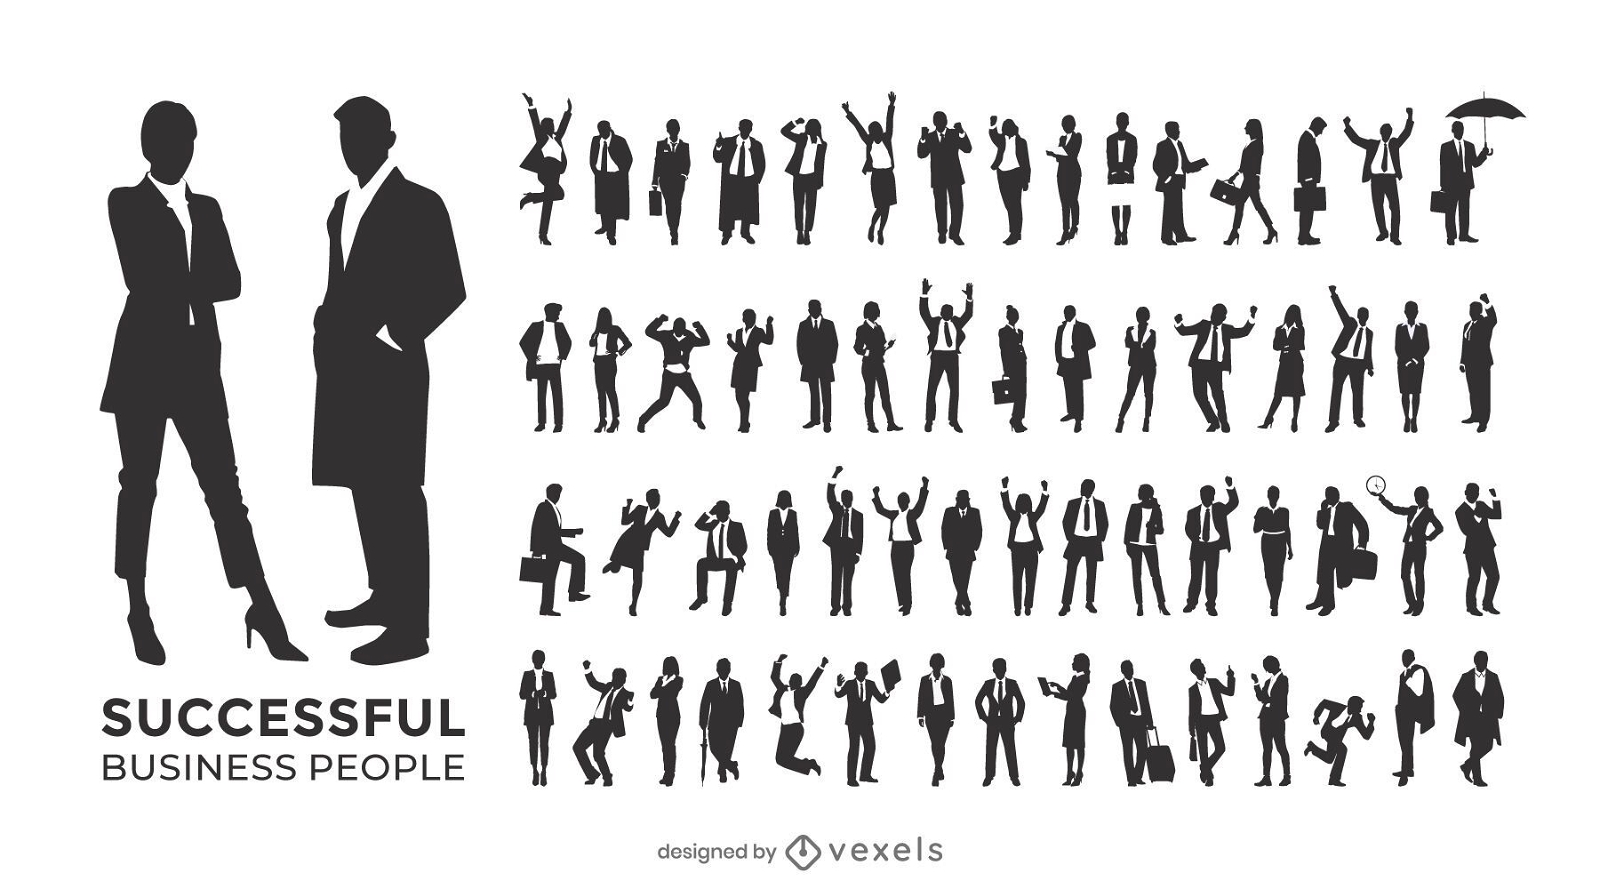 silhouette business people